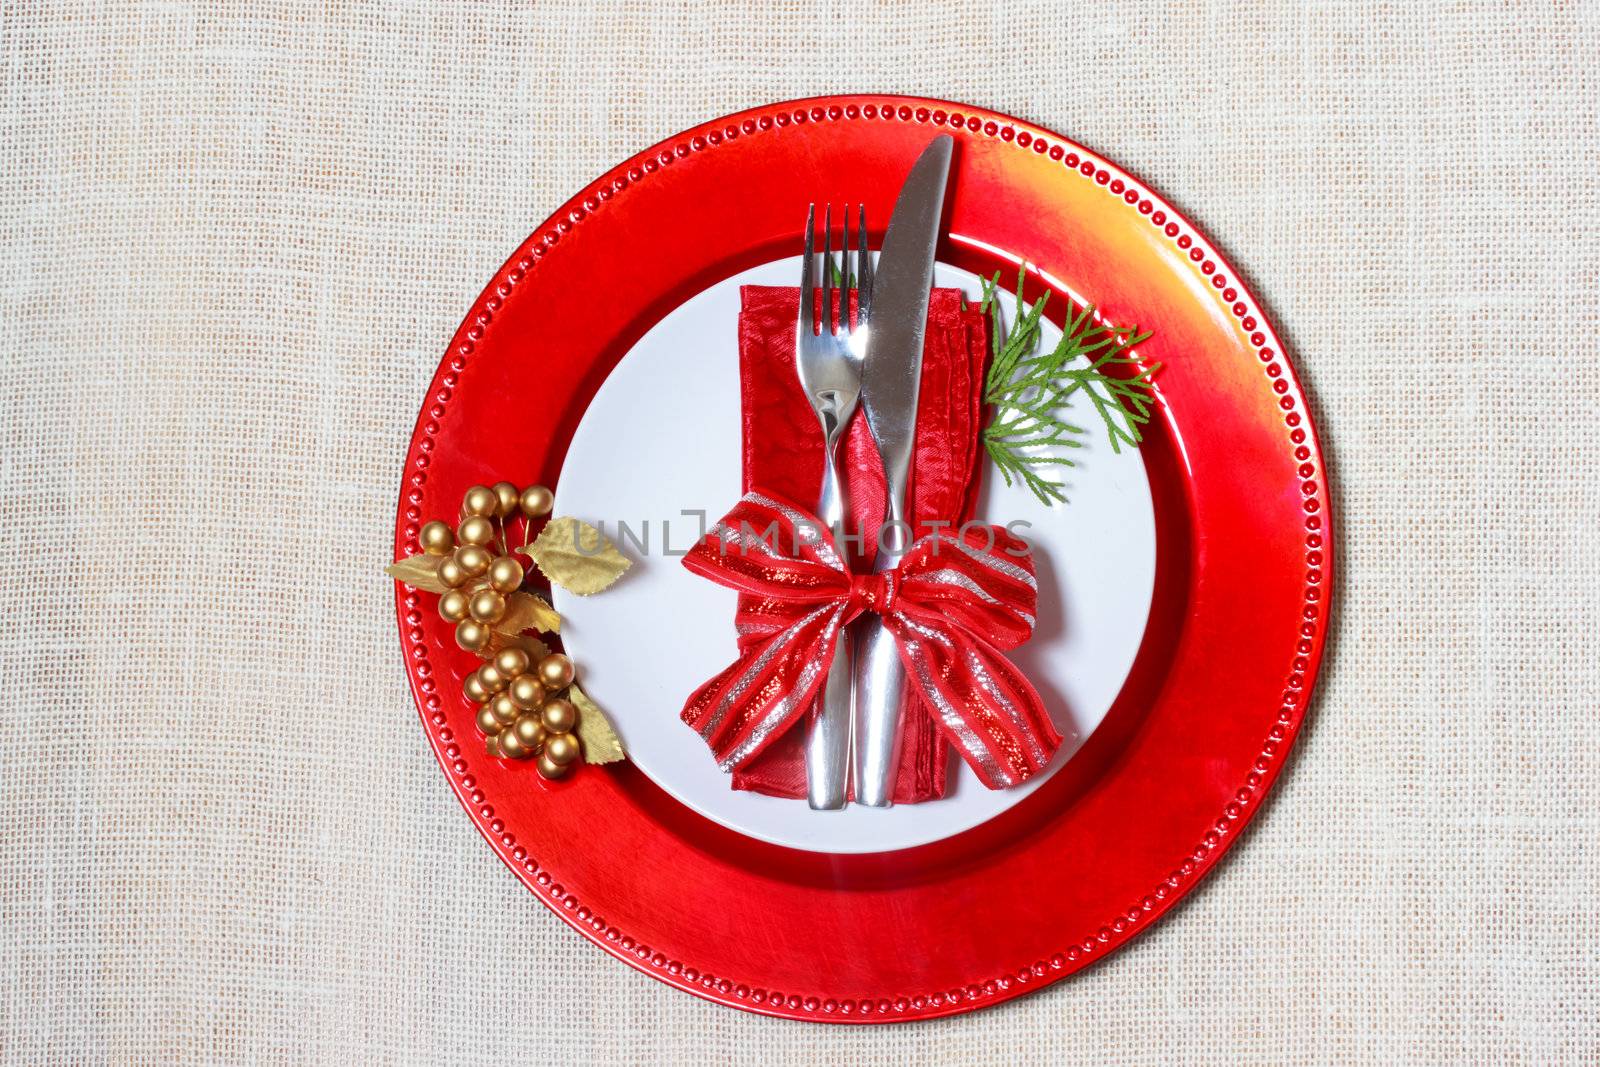 Holiday plates with silverware by melpomene